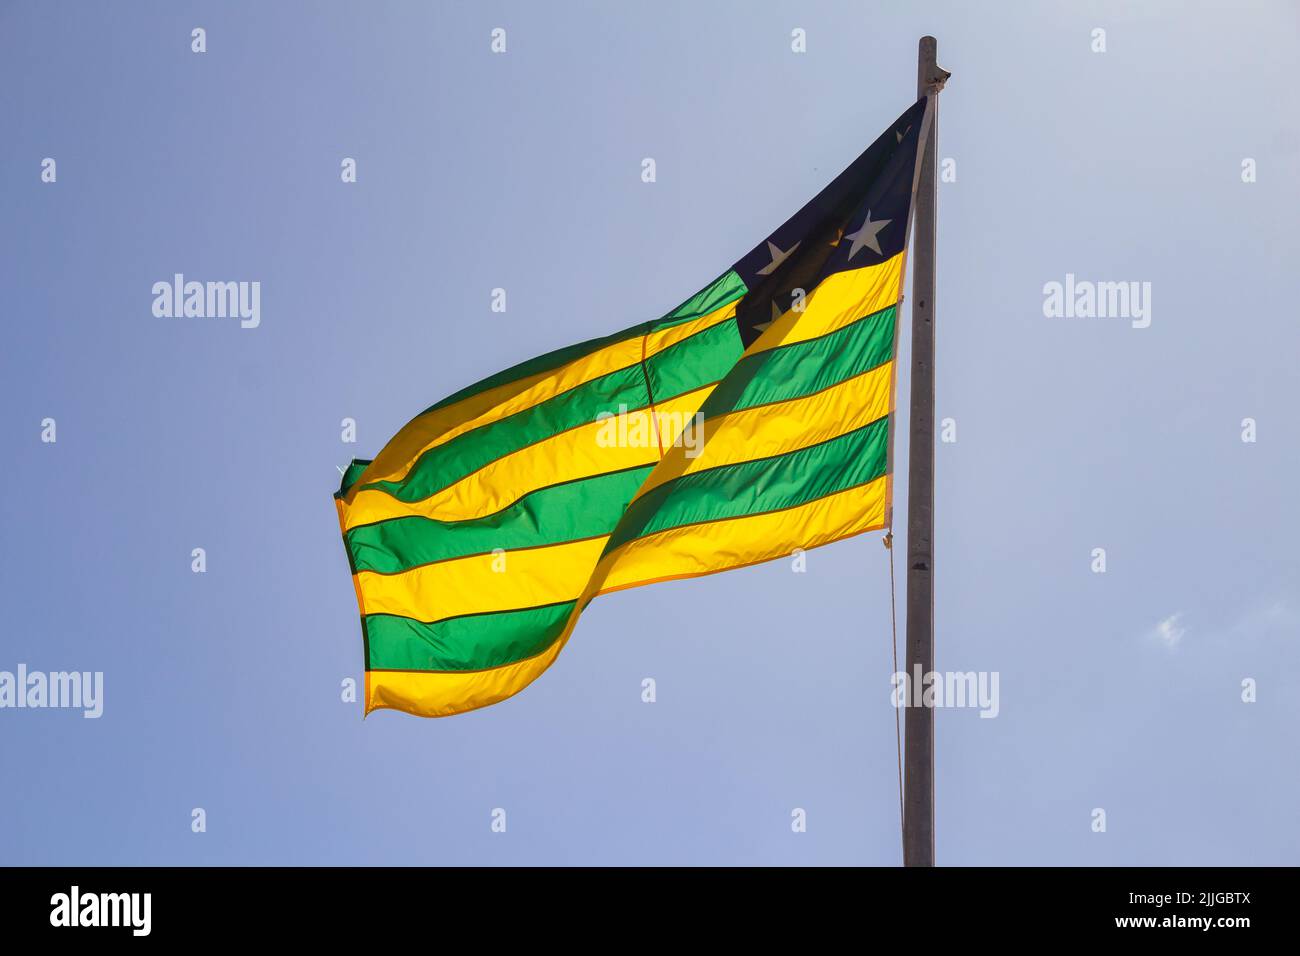 Brasília, Federal District, Brazil – July 23, 2022:  Goias state flag flying and fluttering in the wind with blue sky in the background. Stock Photo